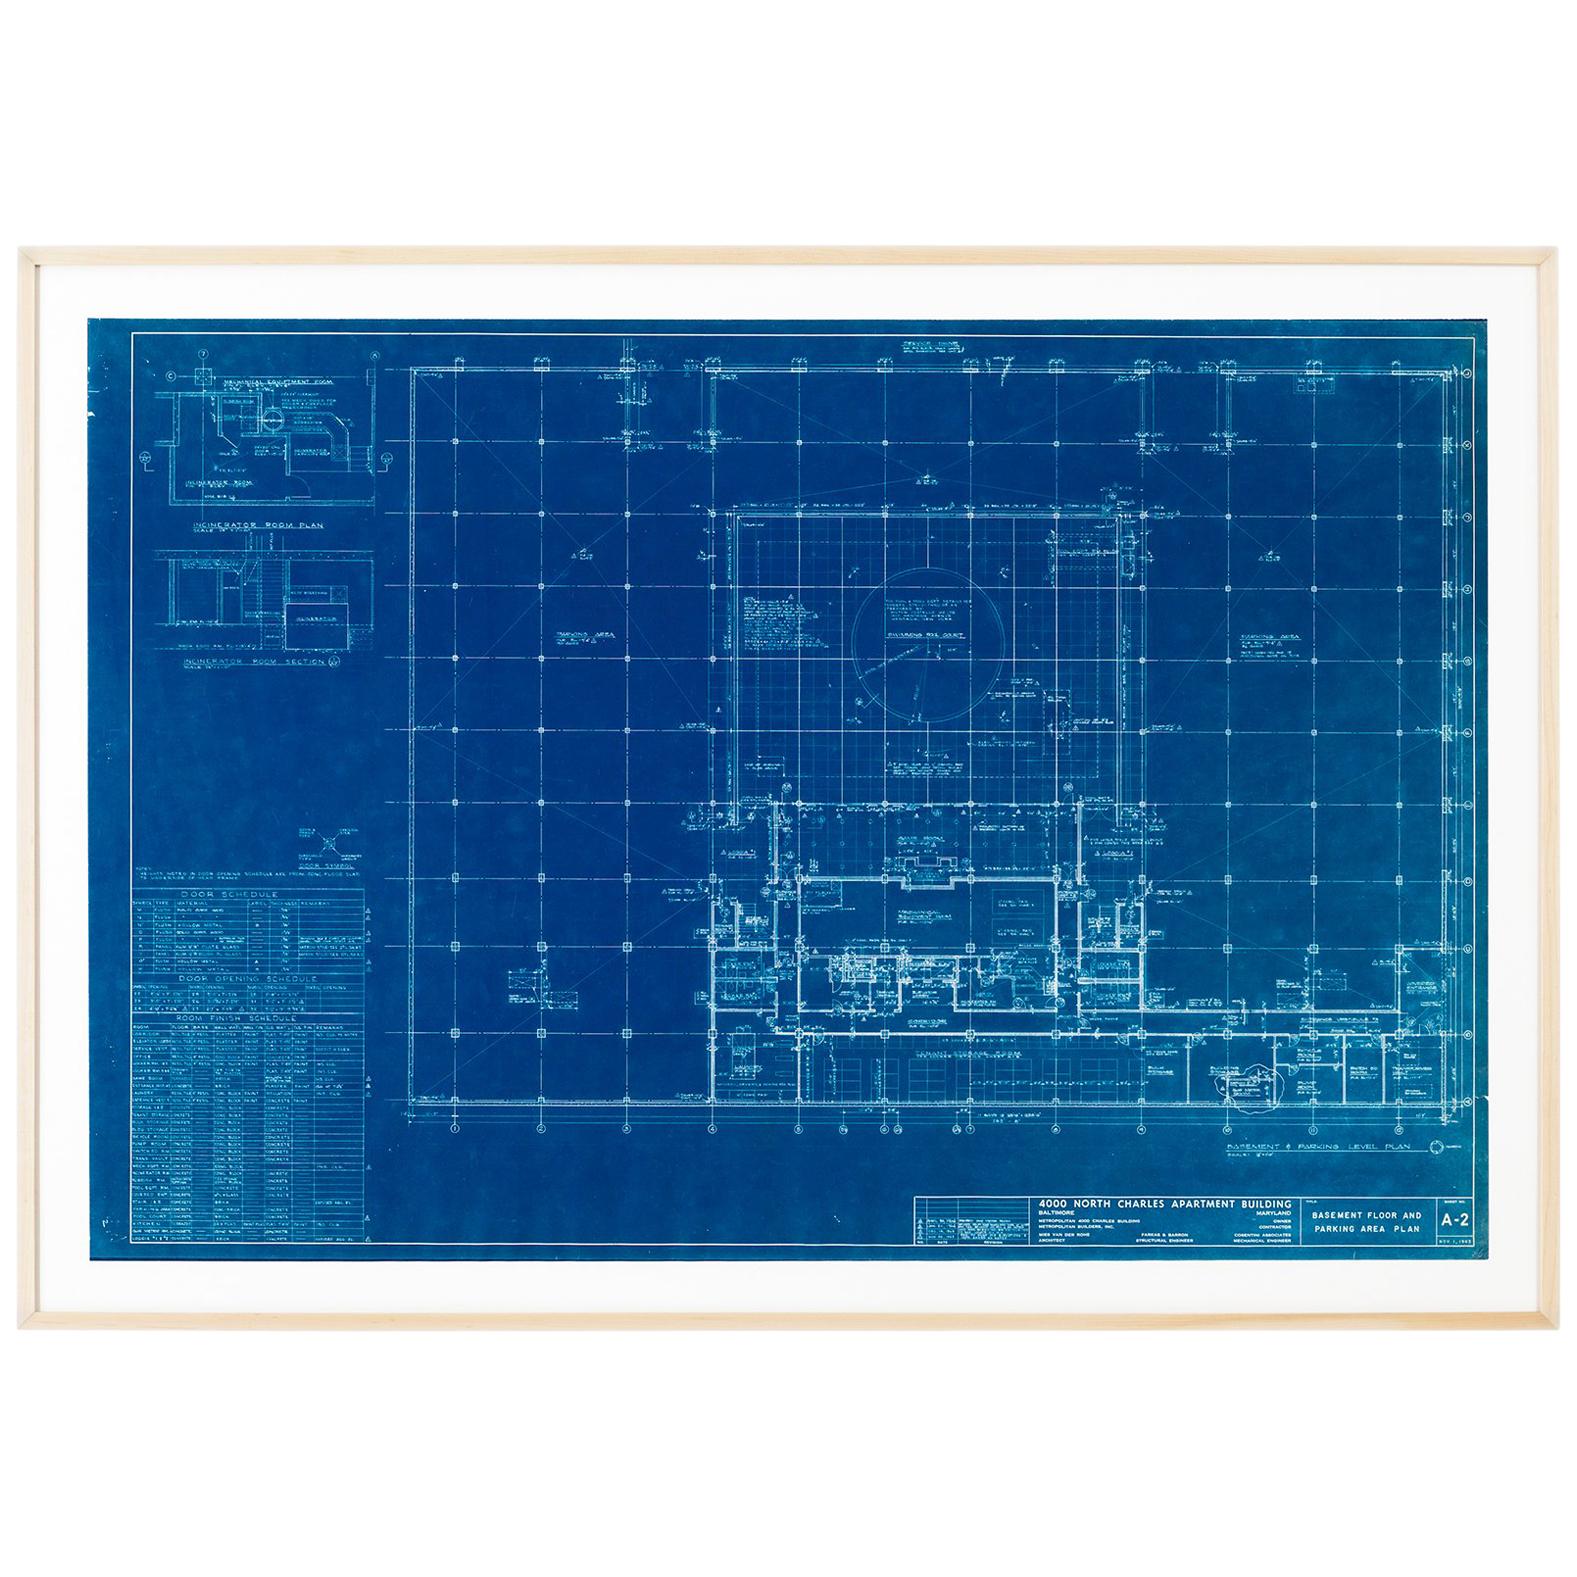 Mies van der Rohe Blueprint, 4000 N. Charles Baltimore, 1964, Lower Levels For Sale